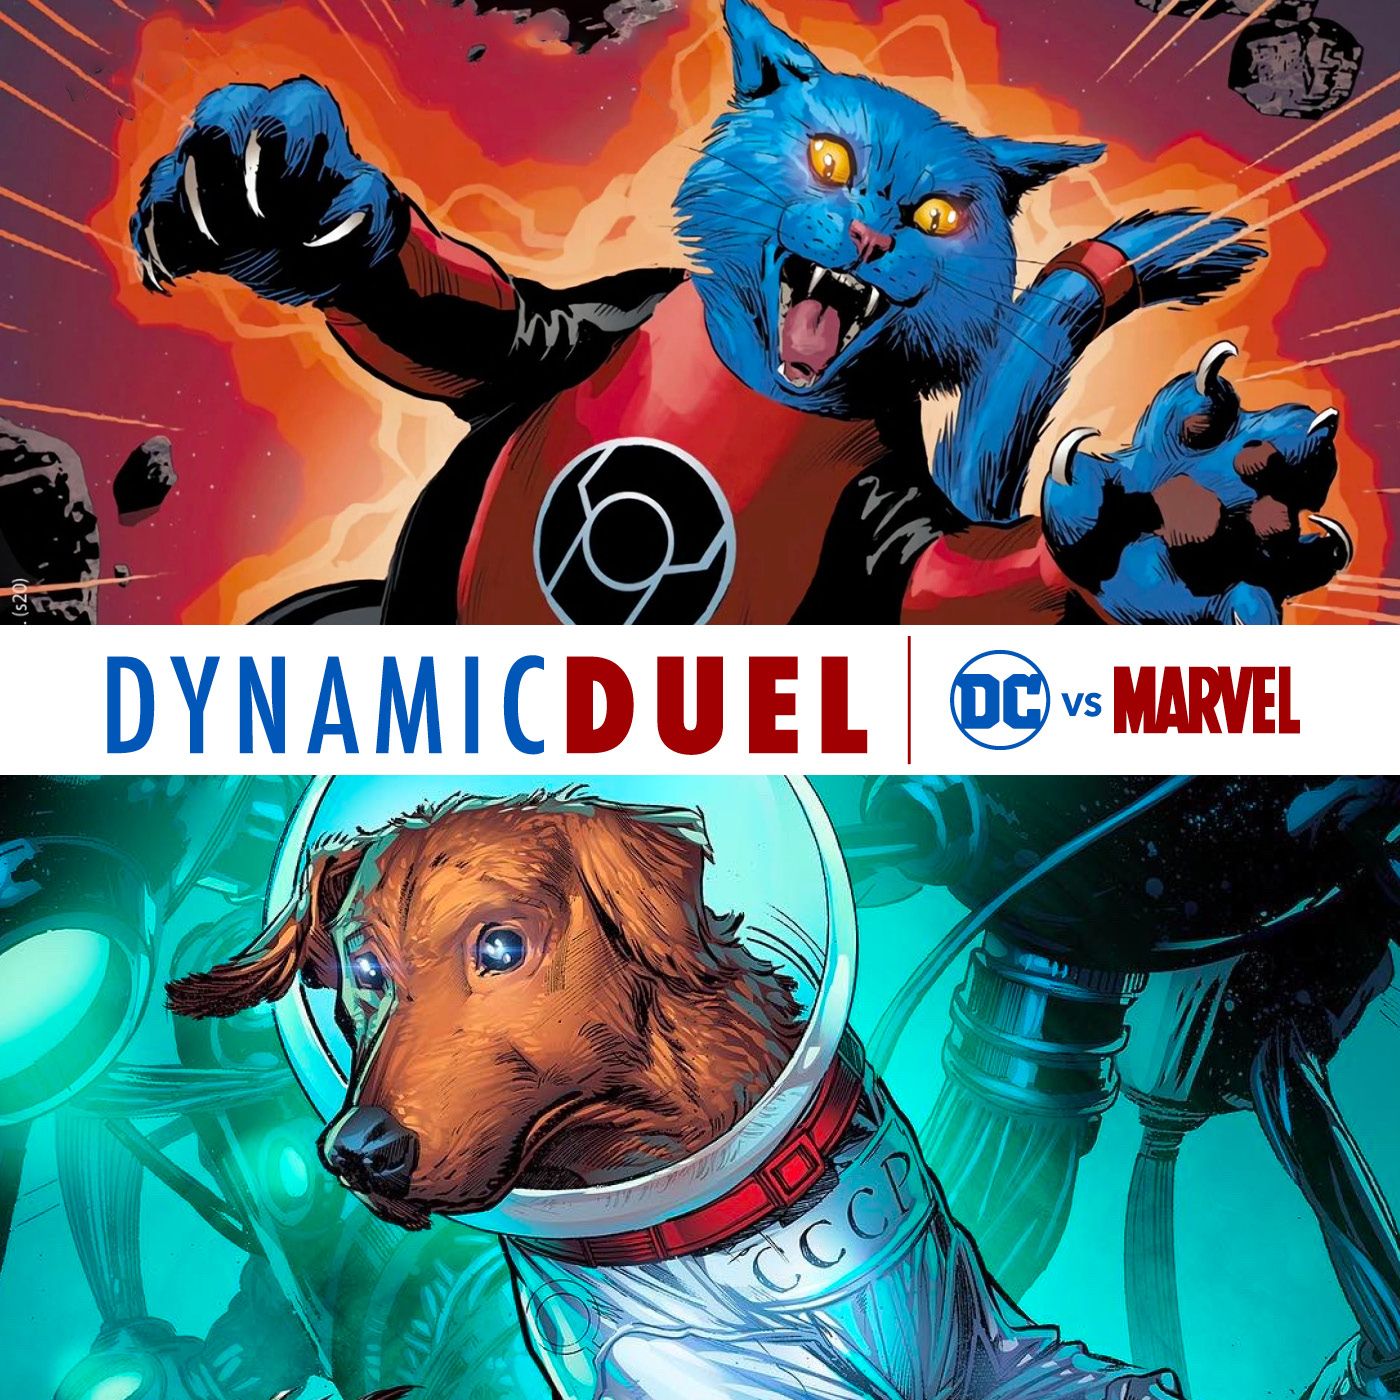 Red Lantern (Dex-Starr) vs Cosmo the Spacedog Image